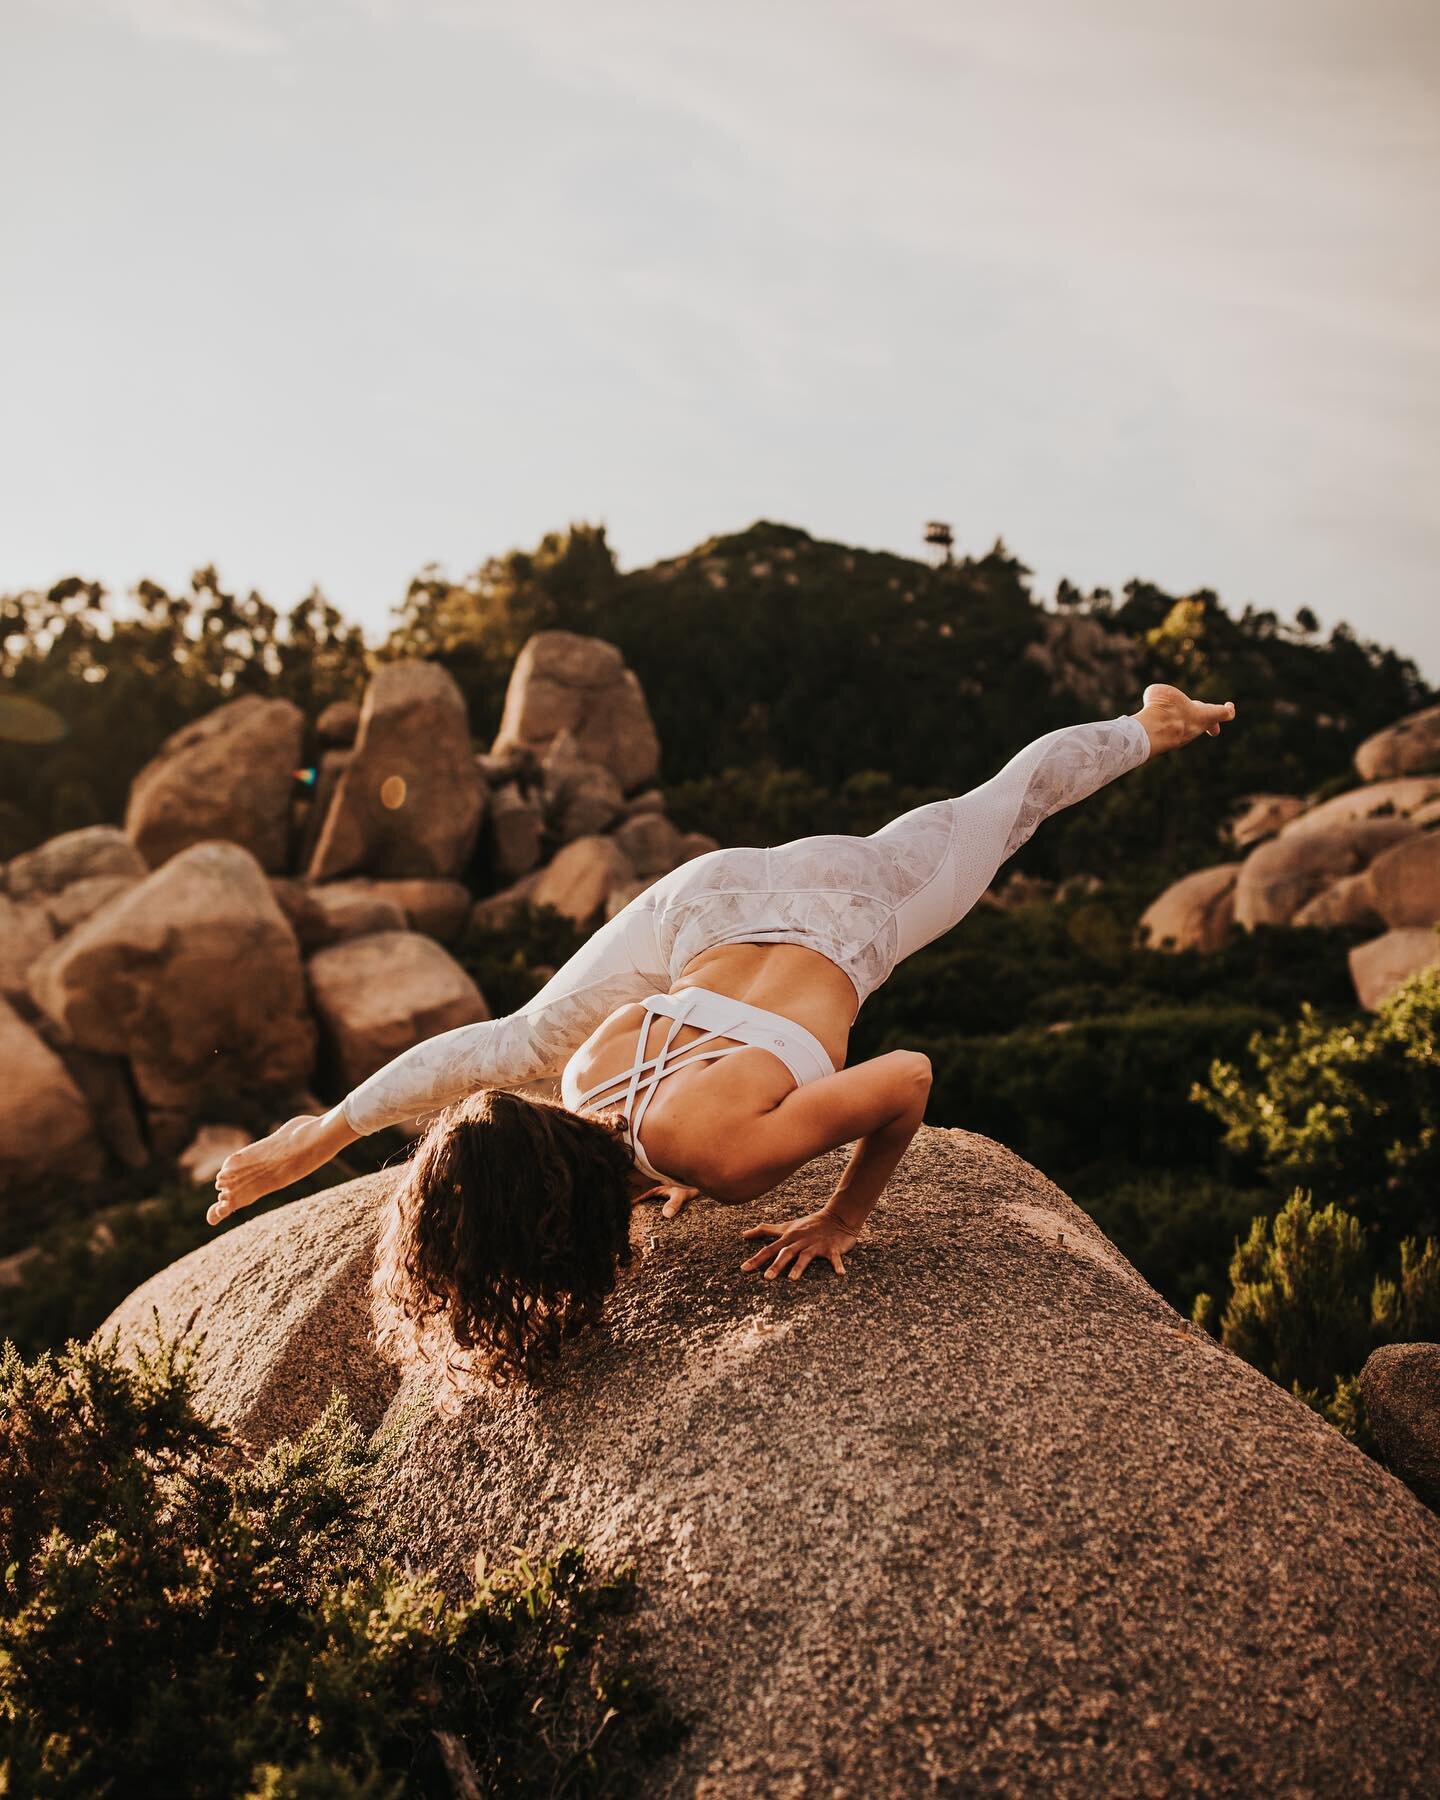 How do you feel about arm balances?
.
They can really bring up a whole spectrum of feels: ambitiousness, joy, frustration, fear, courage. My feelings towards arm balances changed completely when I started looking at the bigger picture - not just my a